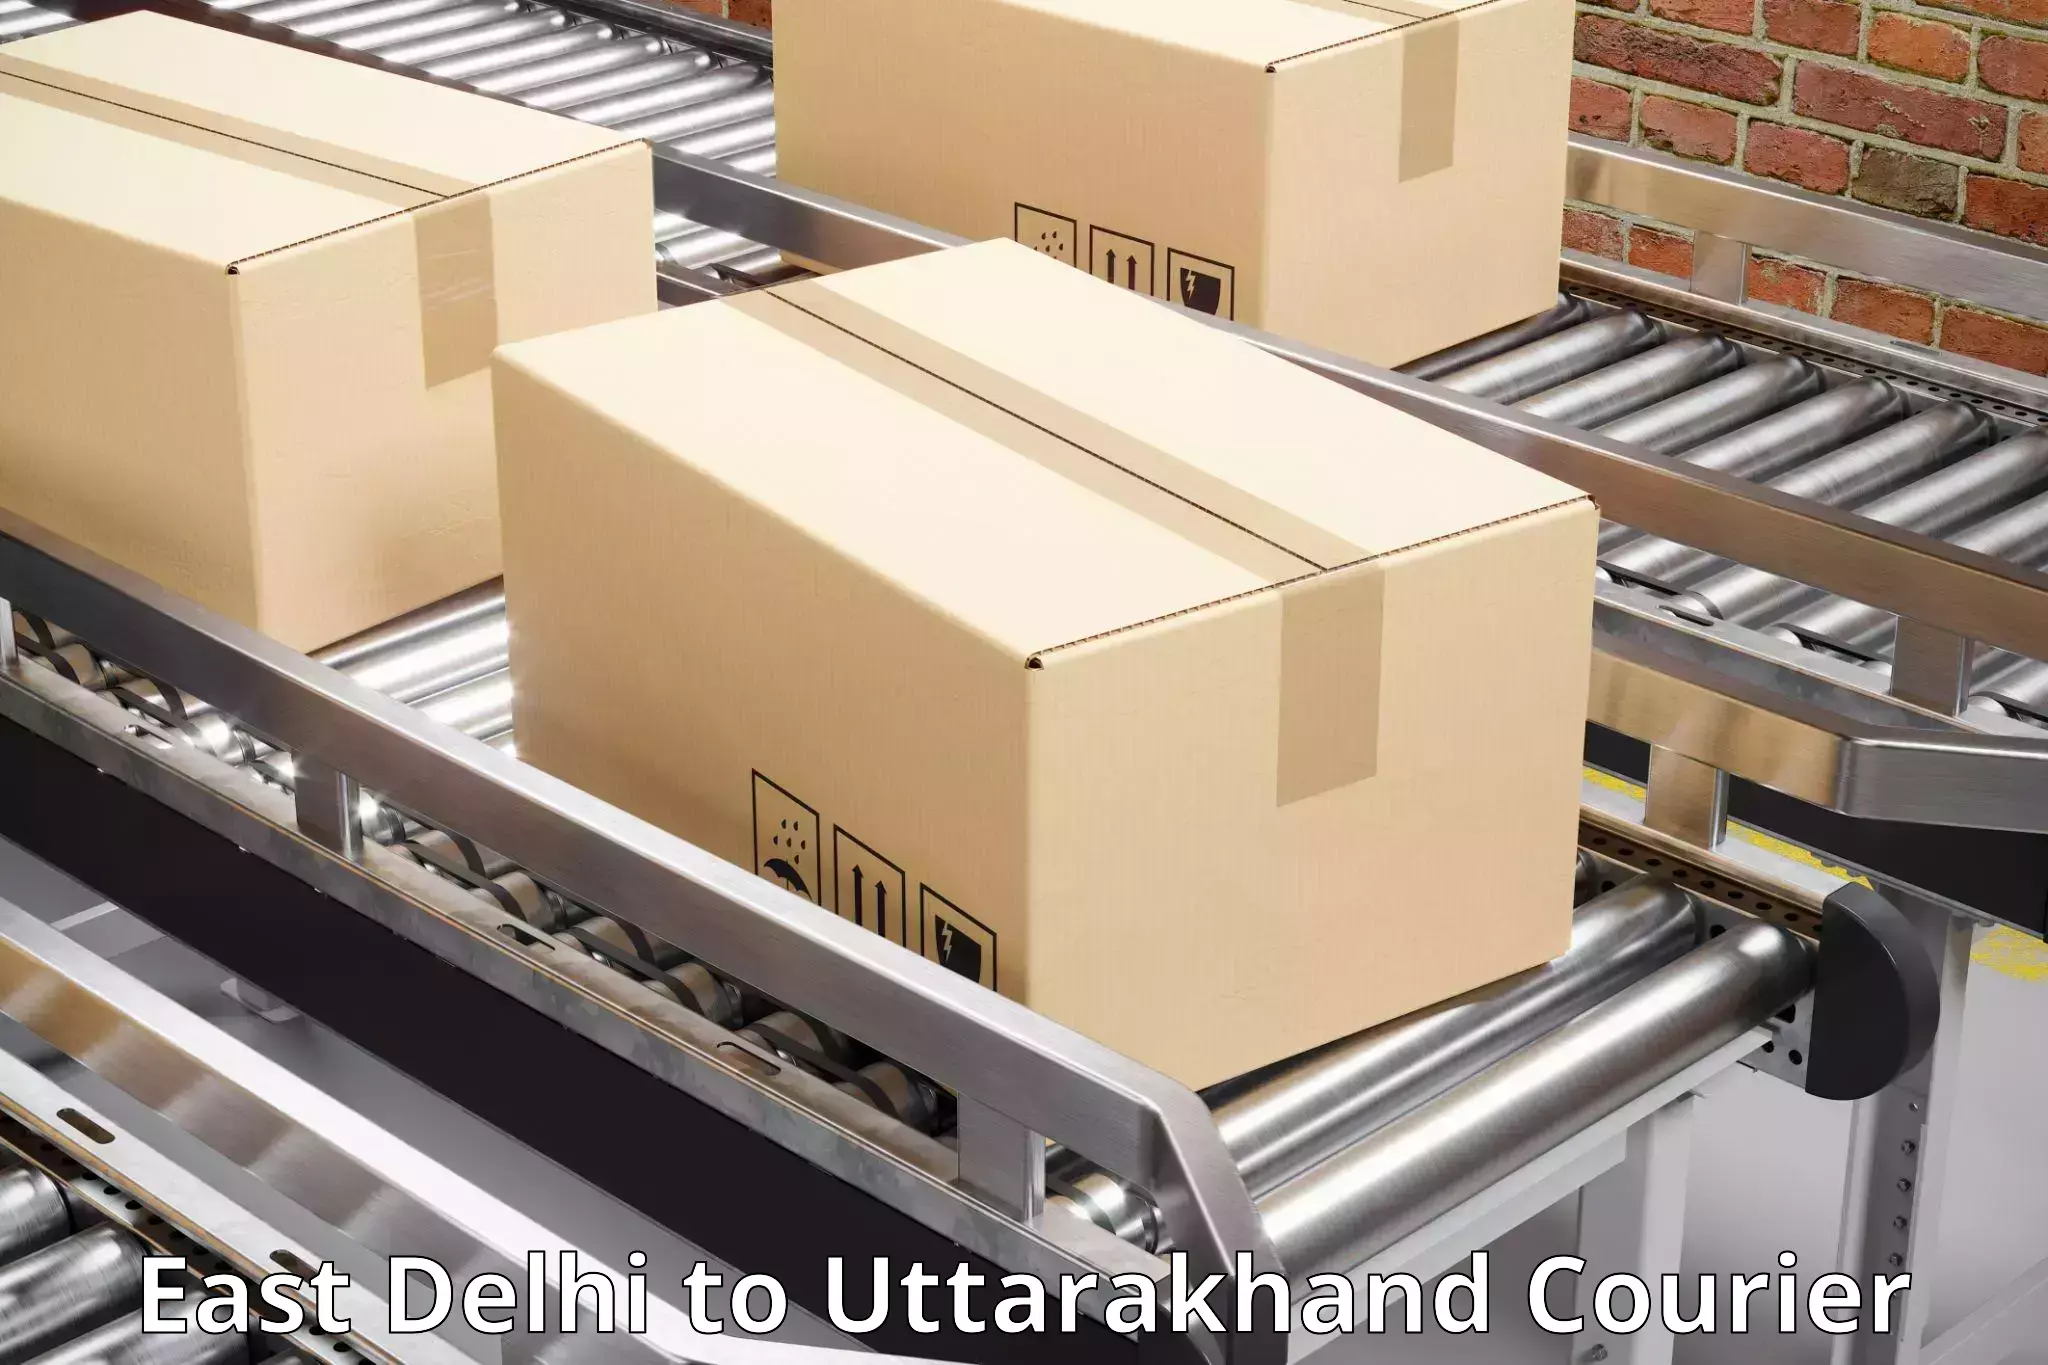 Retail shipping solutions East Delhi to Lohaghat